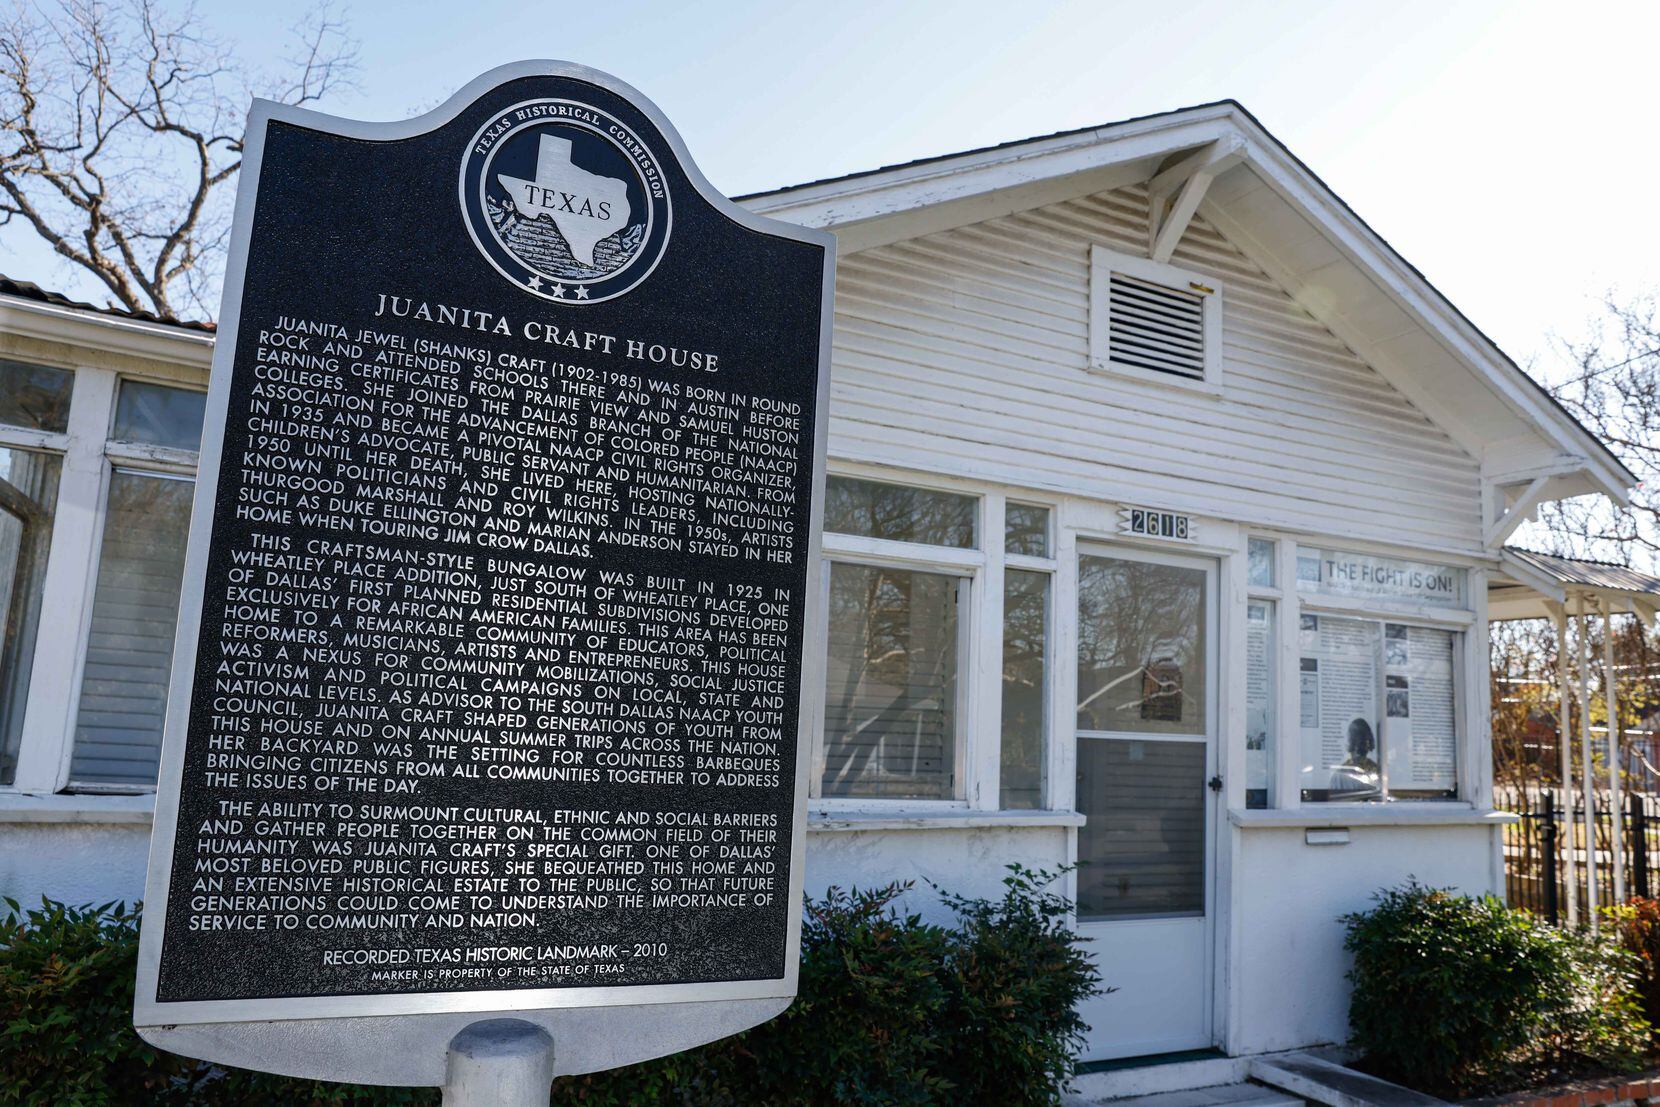 Many household names from the Civil Rights Era stopped by the Juanita Craft home, including the Rev. Martin Luther King Jr., Thurgood Marshall and former President Lyndon Johnson.